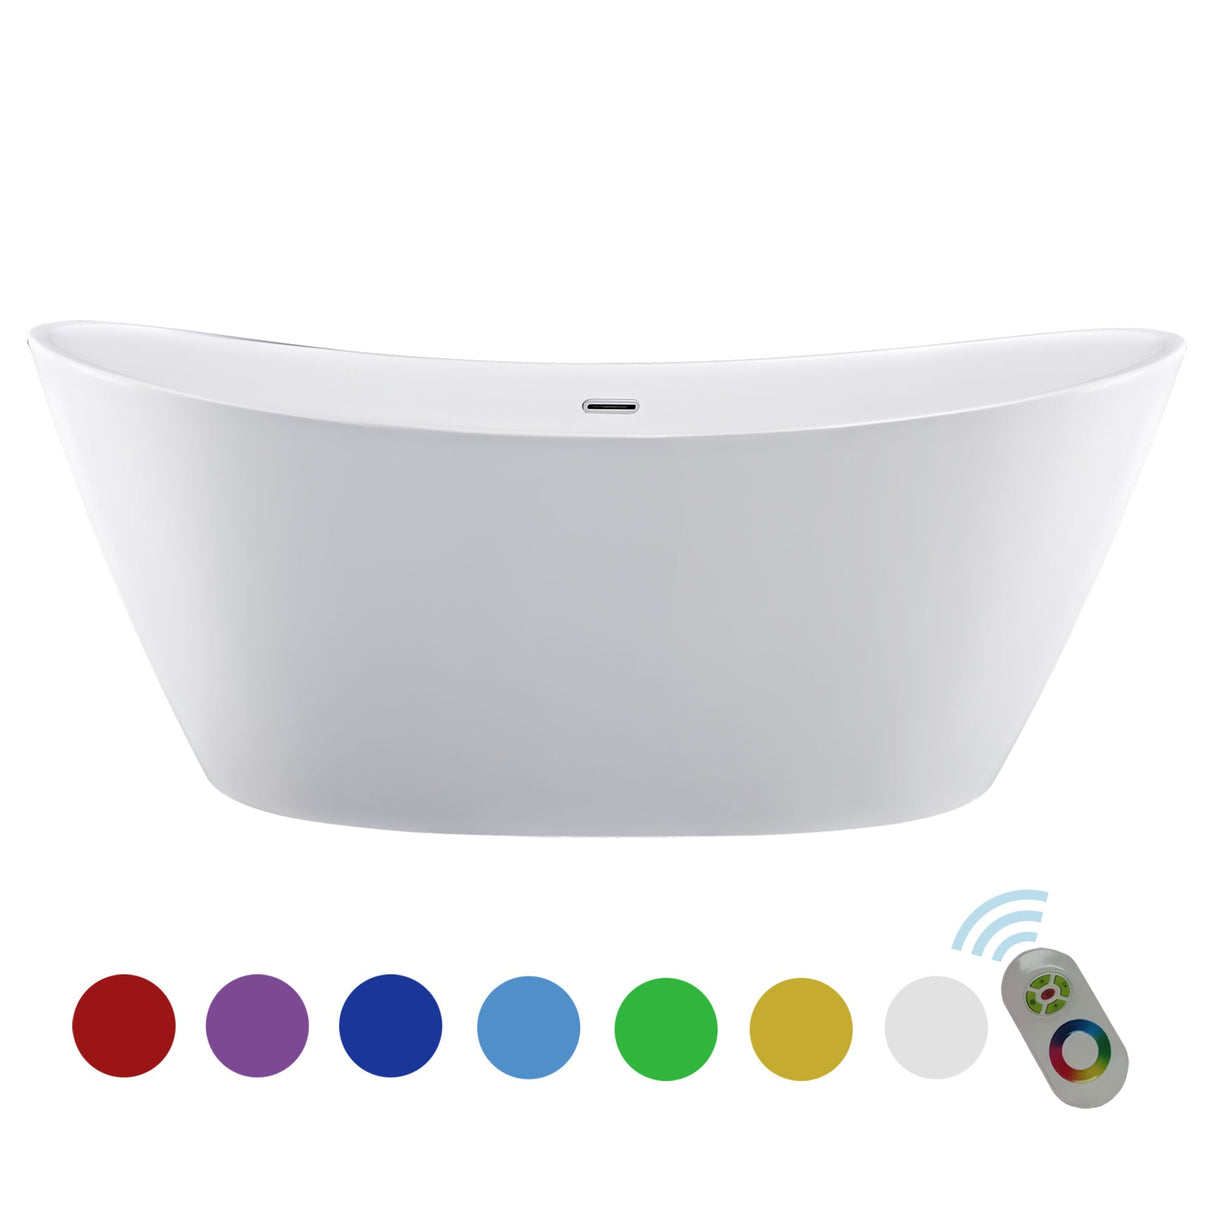 Empava-67FT1518LED freestanding acrylic soaking oval modern white SPA bathtub with LED Lights front view